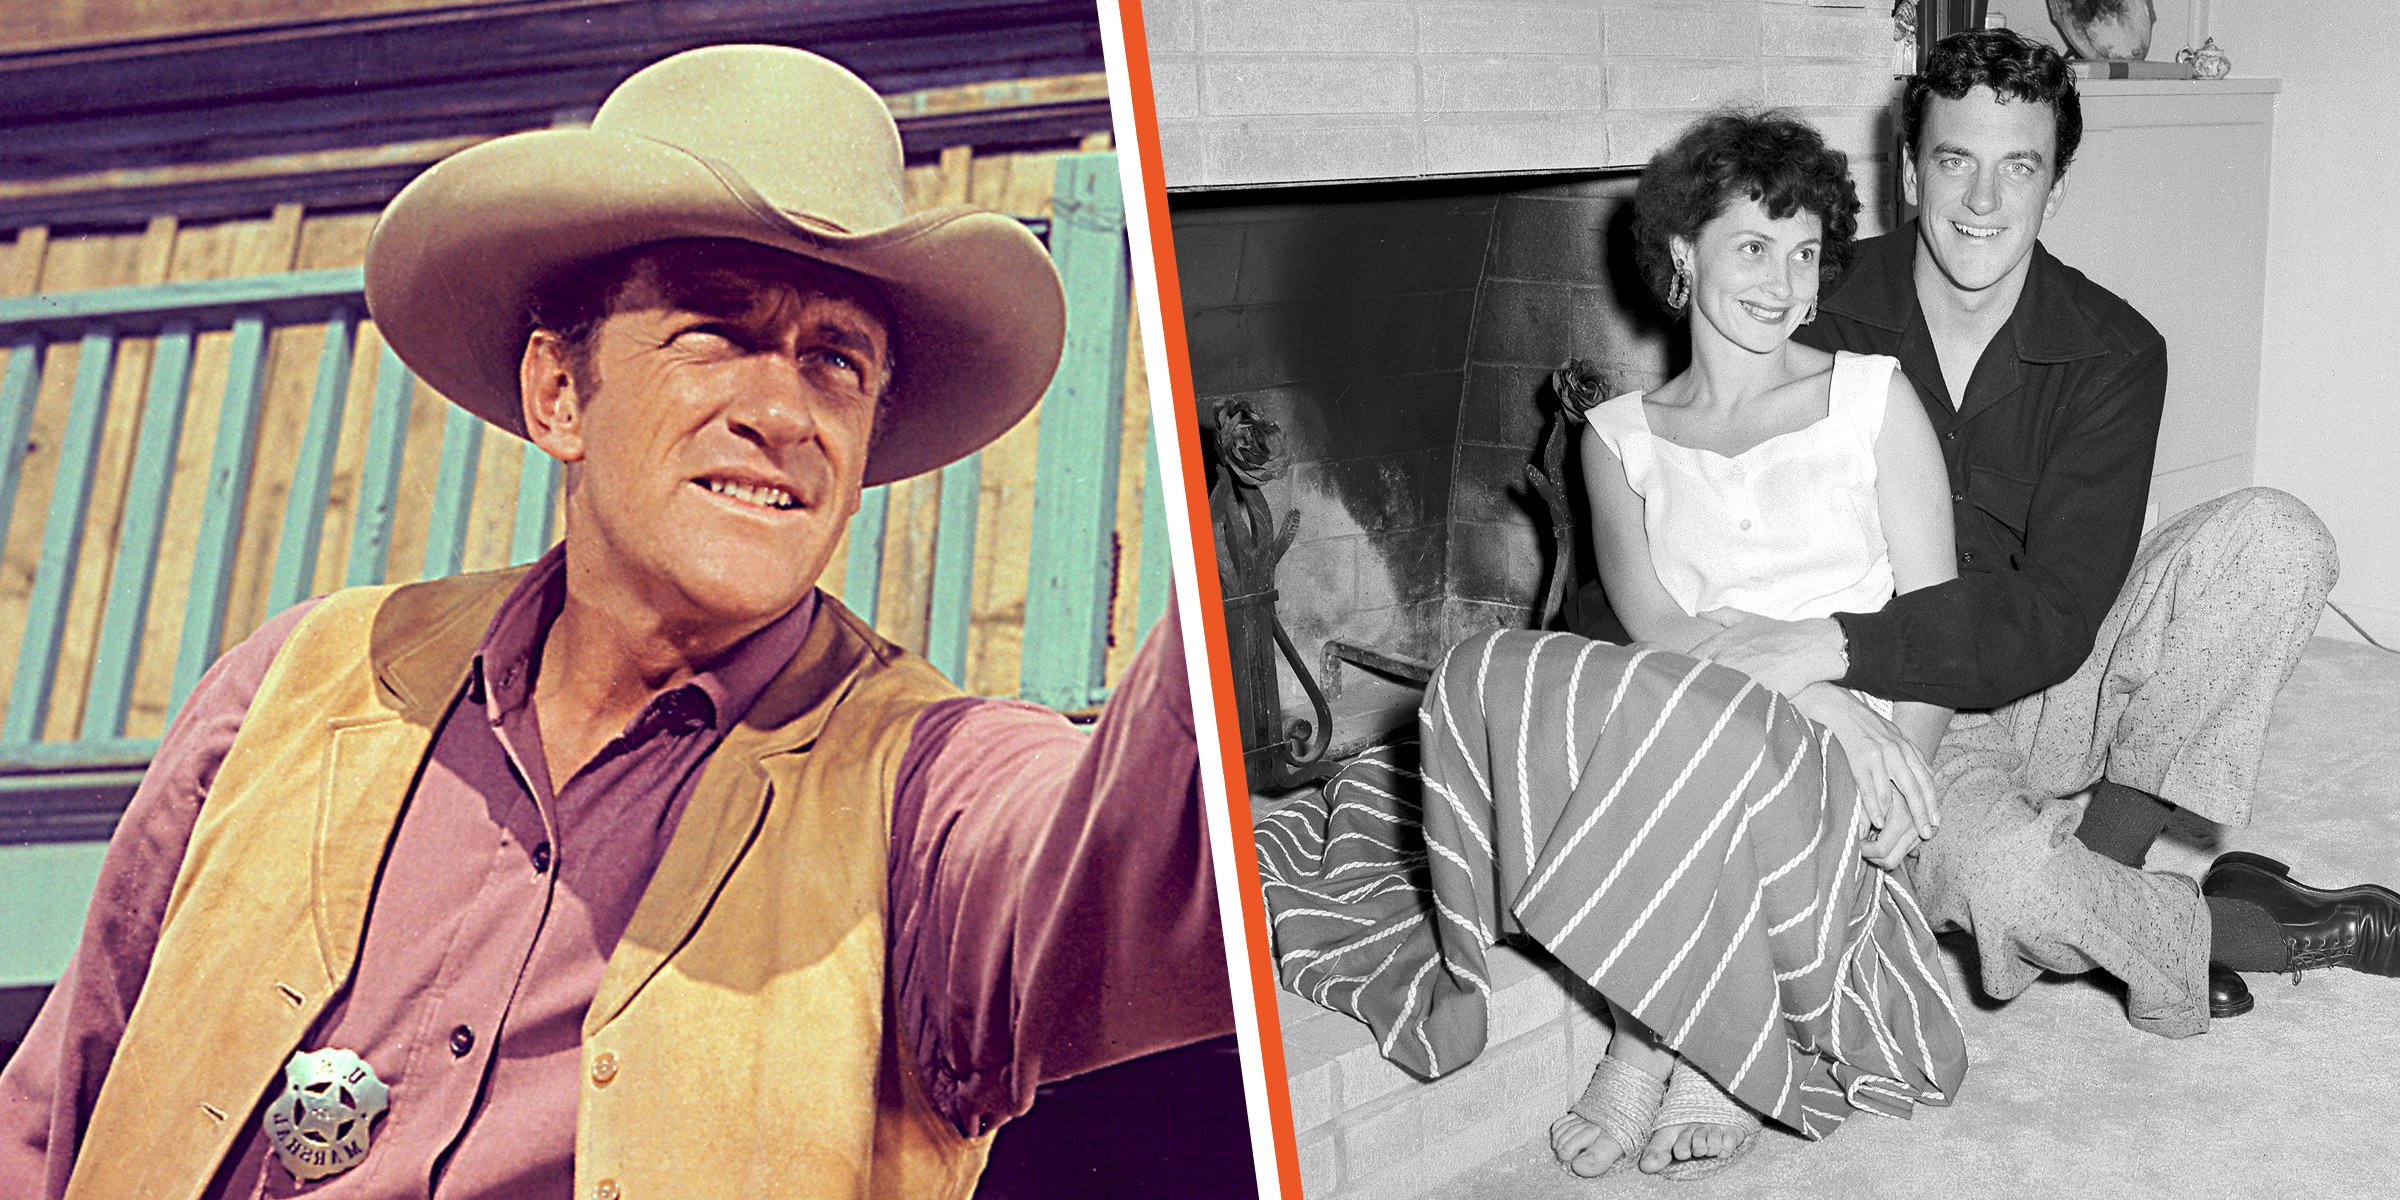 James Arness & Mom of His 3 Kids Wed When He Was 'A Beach Comber' — She  Felt He Flew like a 'Comet' with Fame